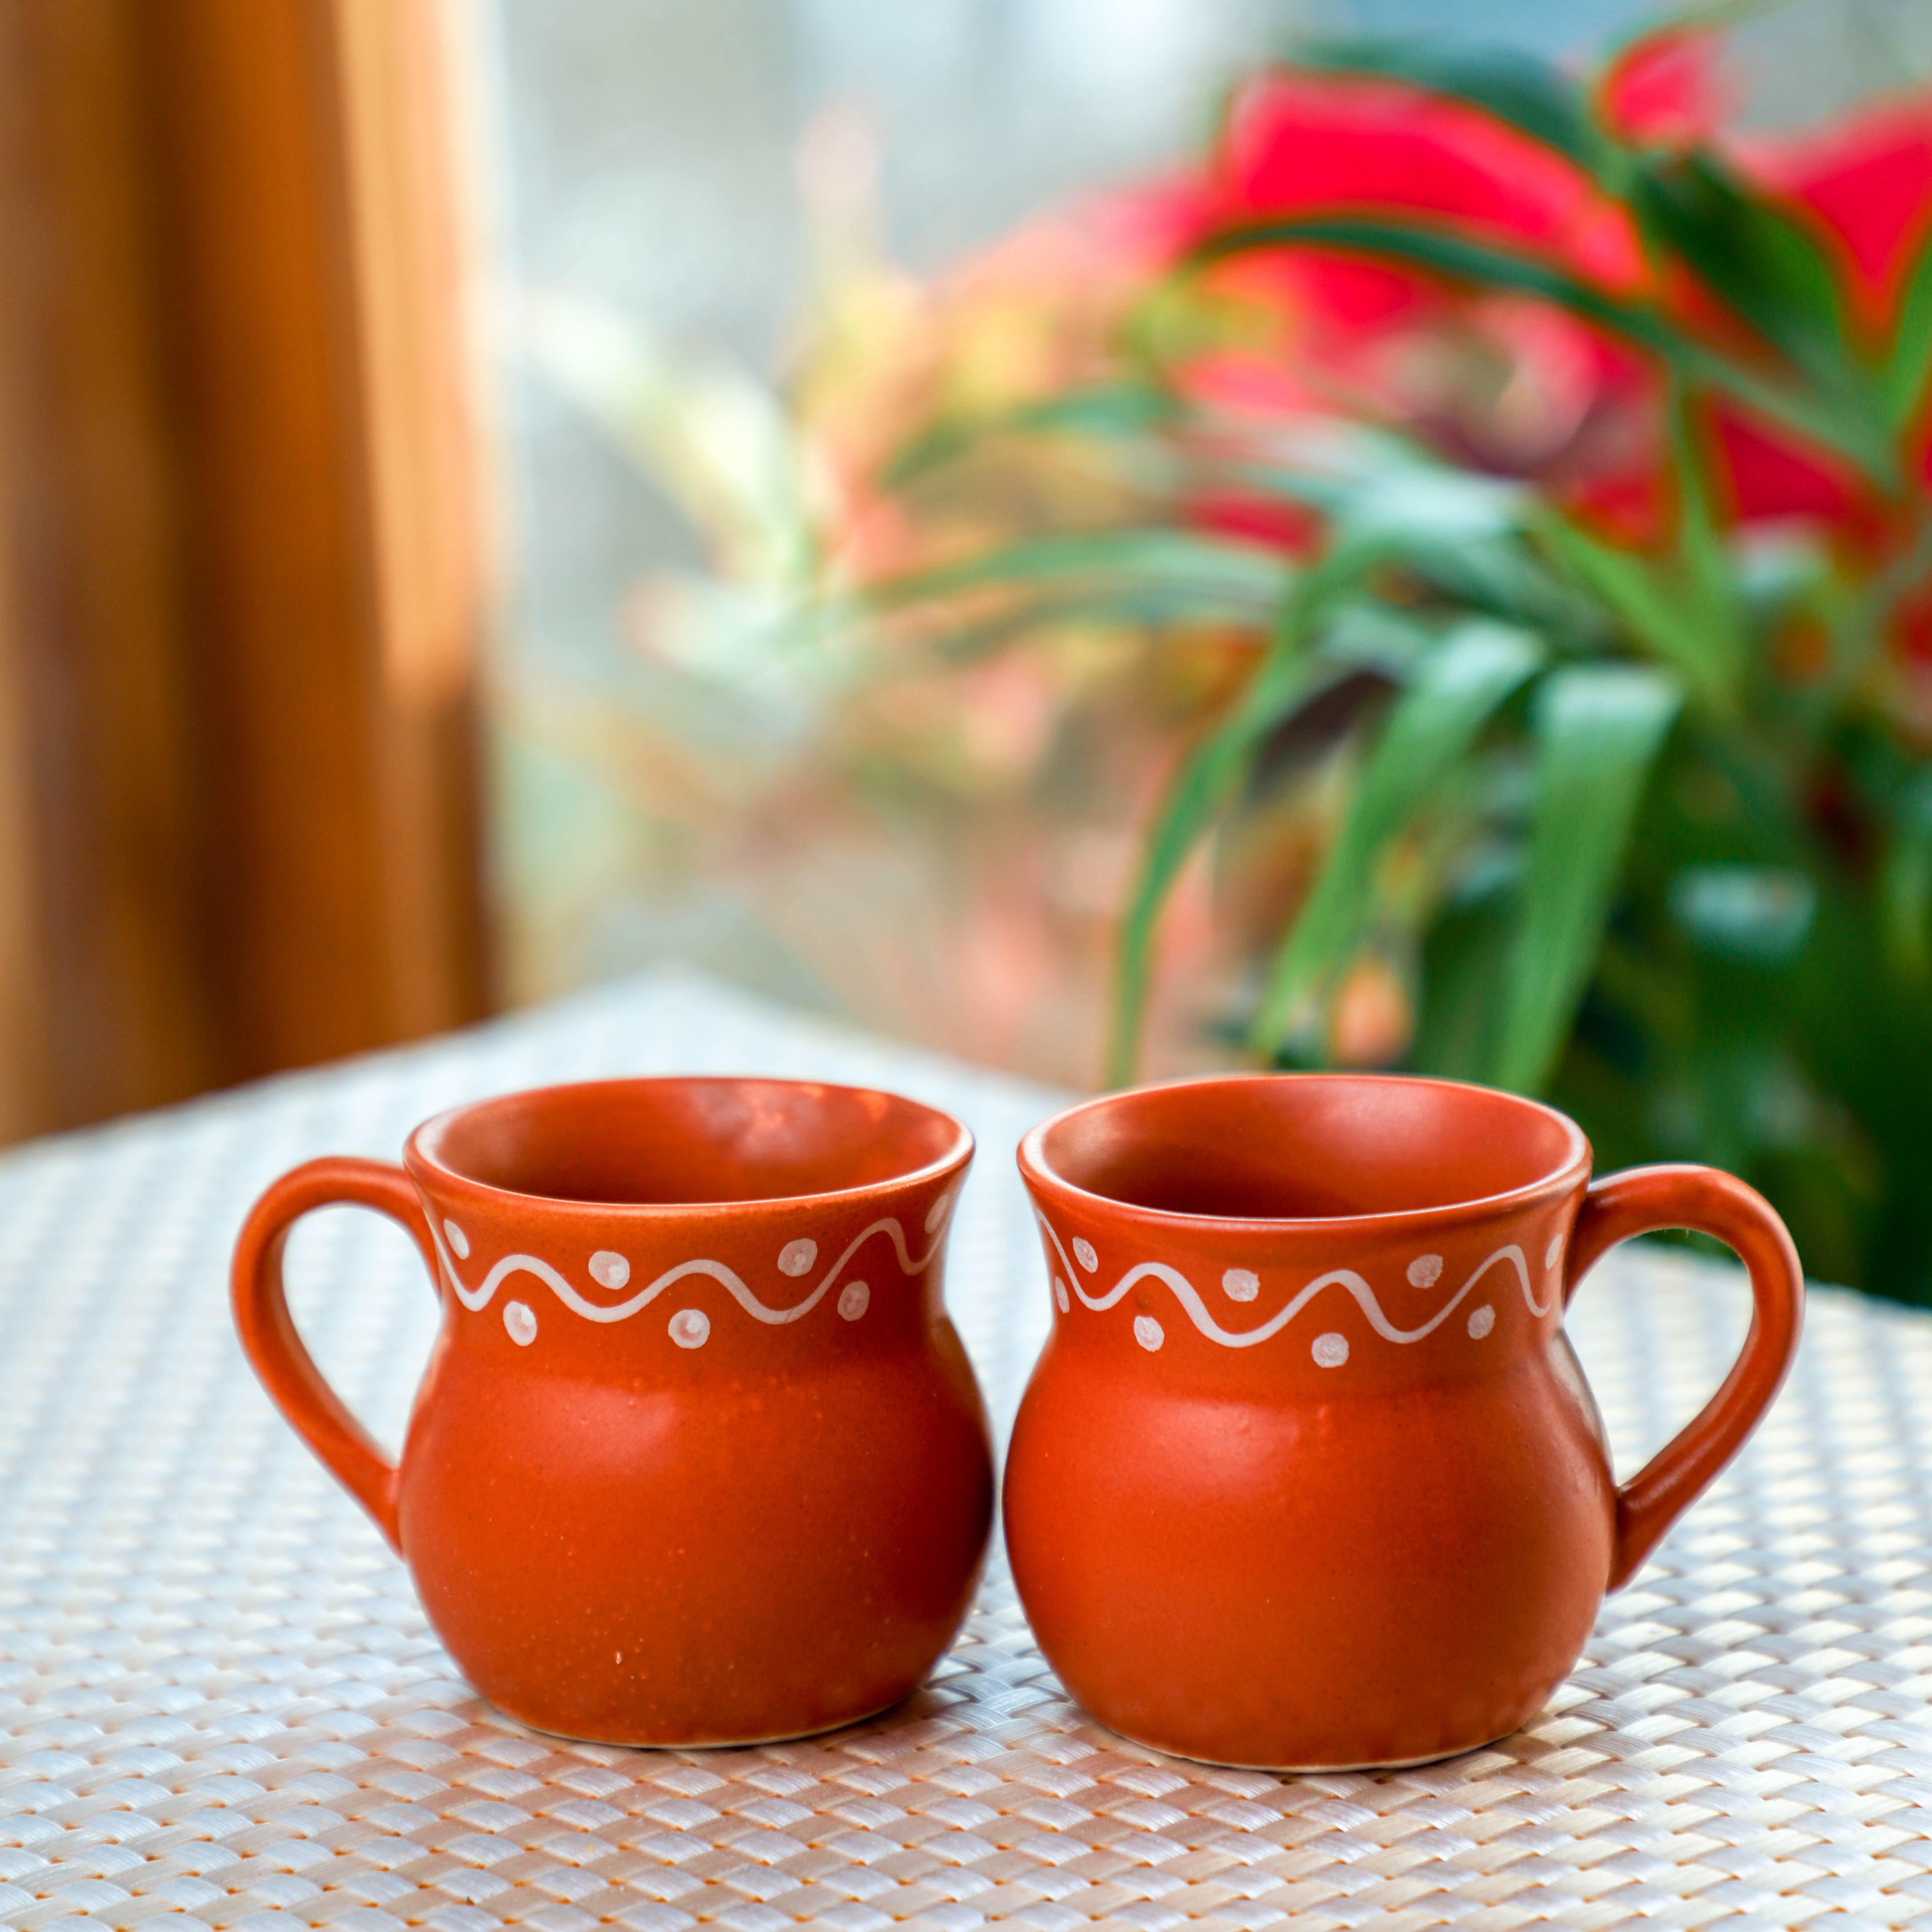 Traditional Ceramic Teacups Kitchenware in the USA